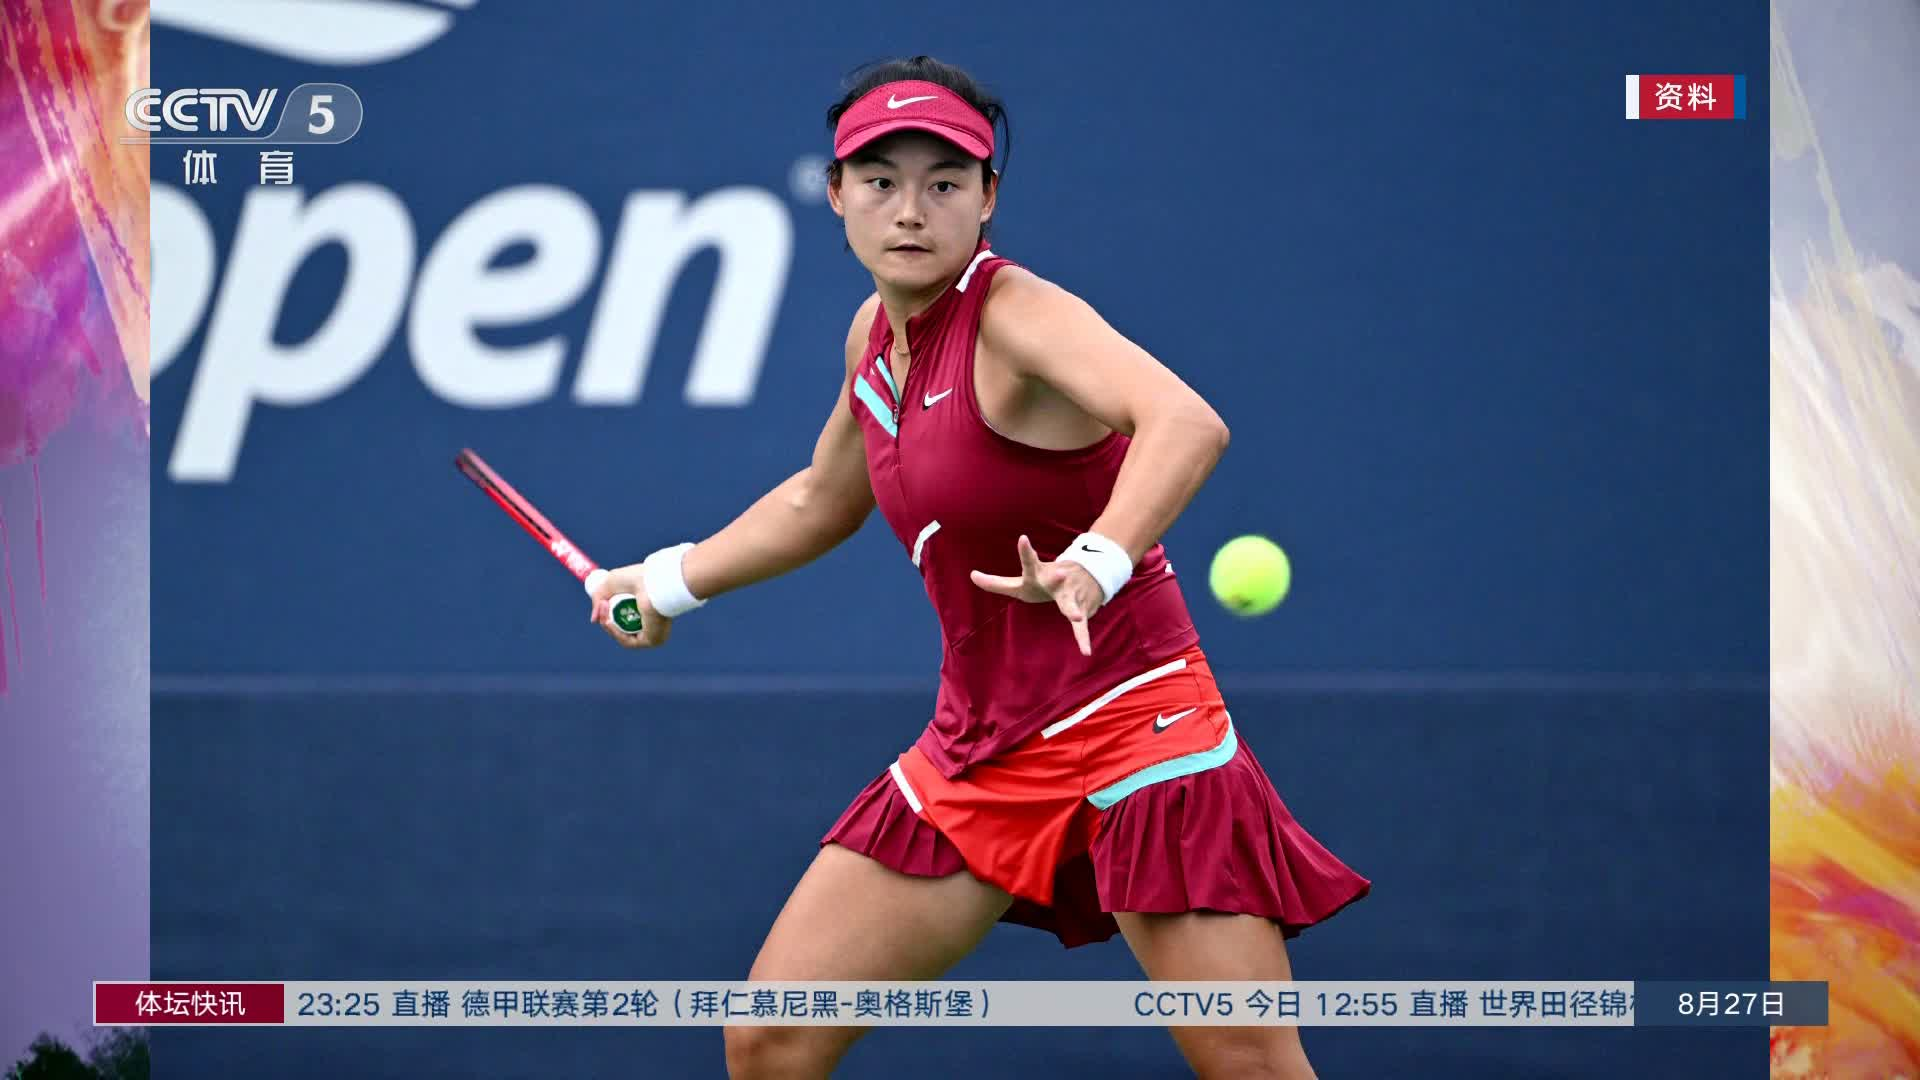 Wang Yafan joins other 6 Chinese players in U.S